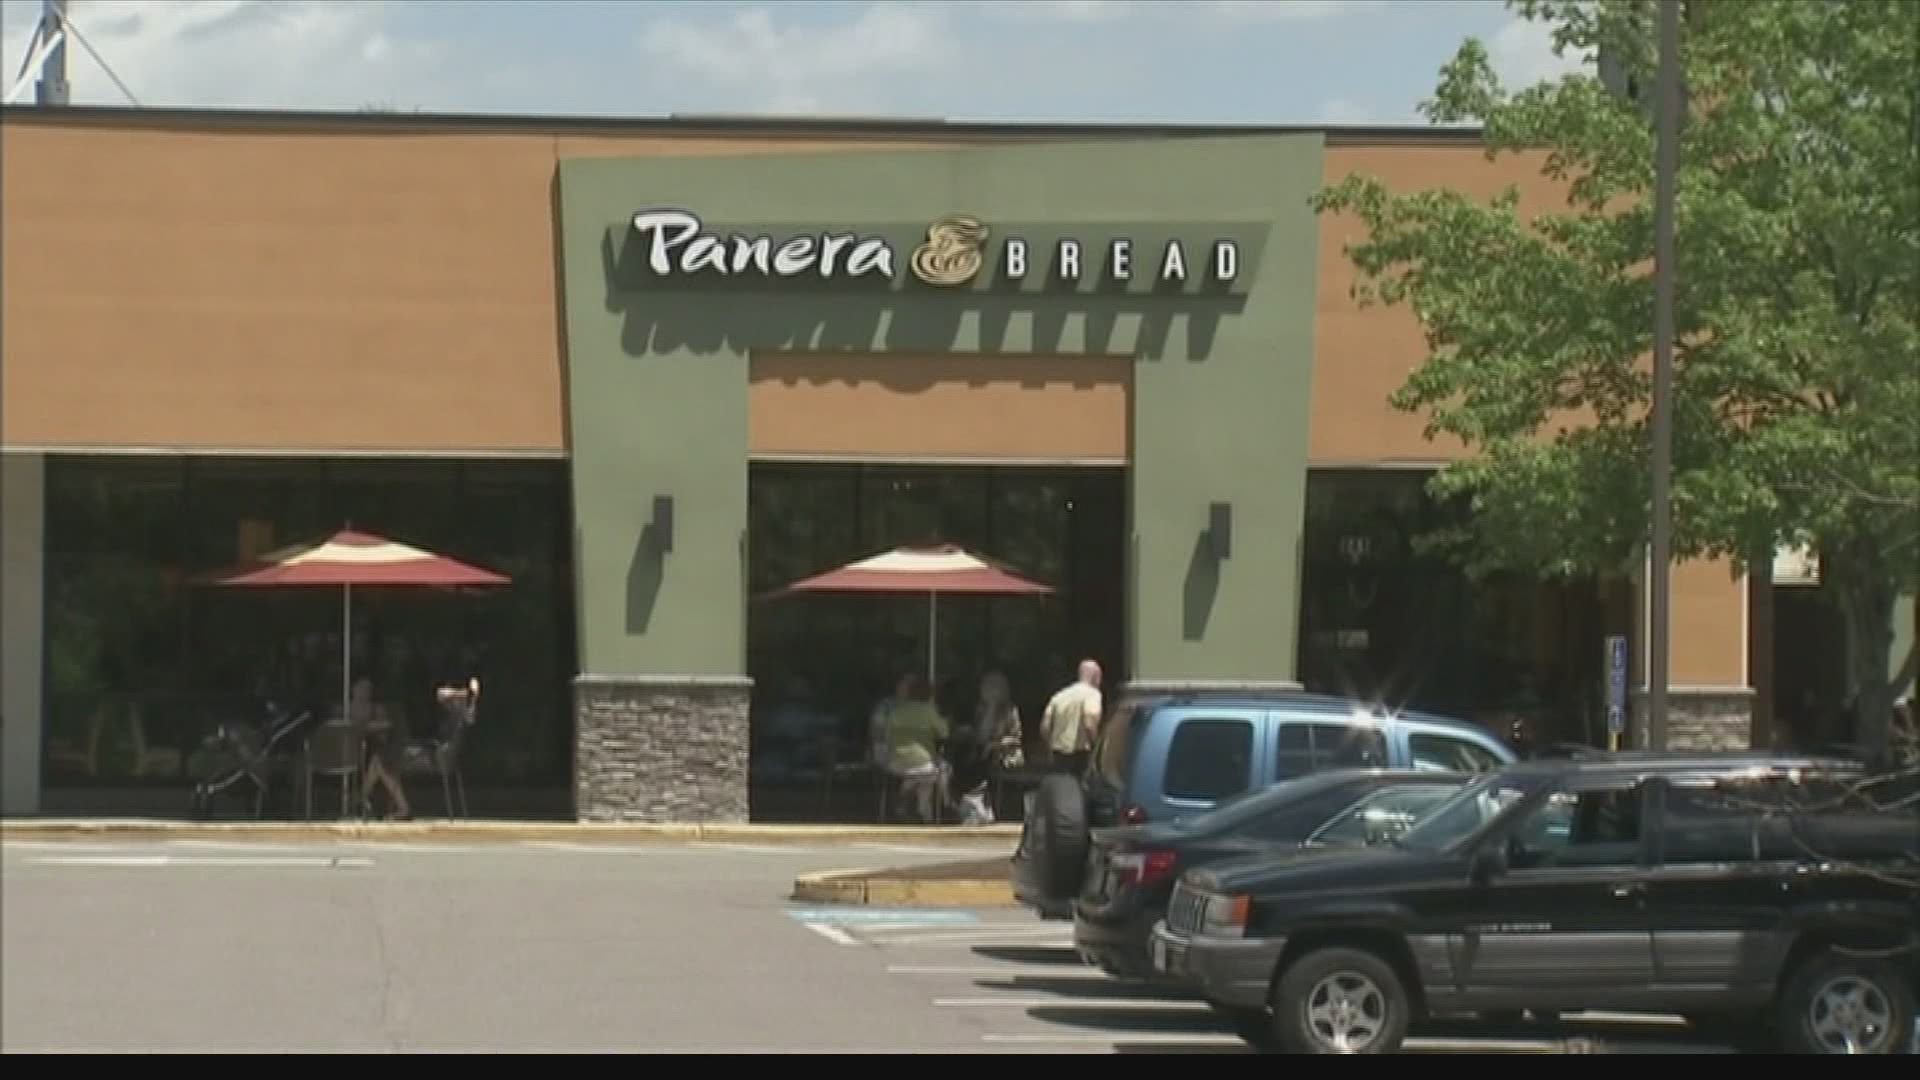 Panera Bread is offering up what some coffee lovers think is a great idea.